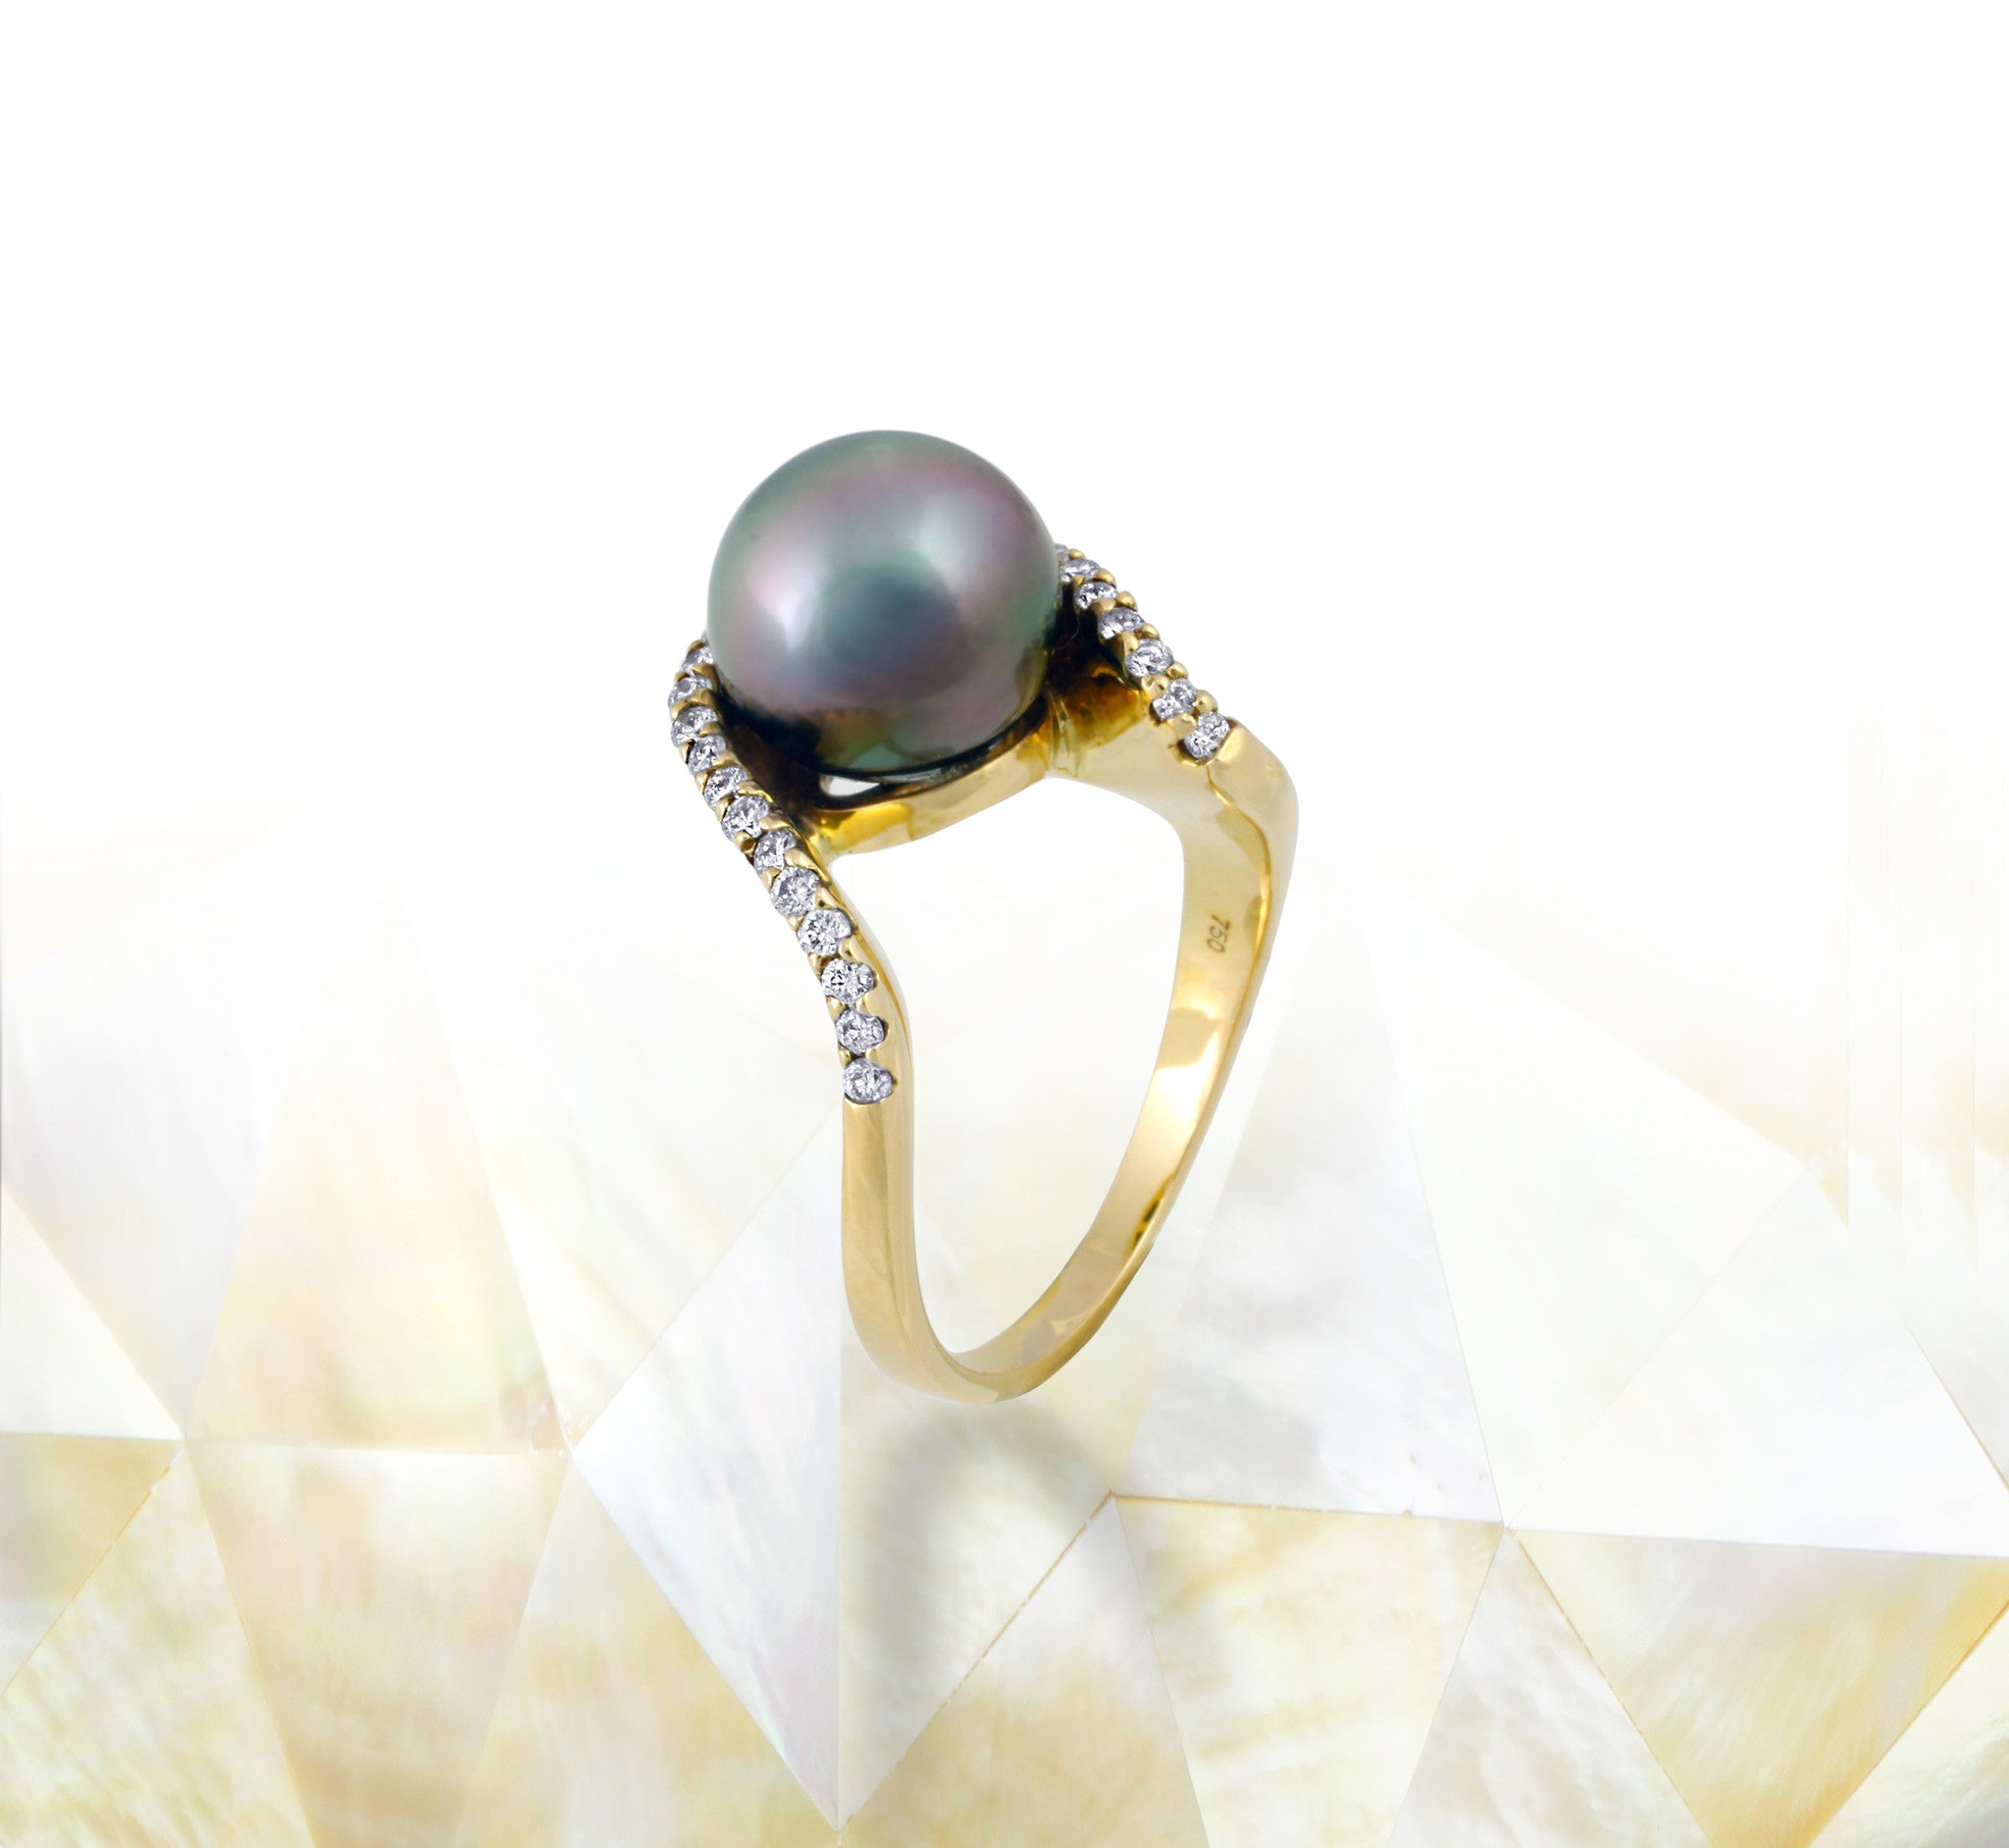 One of a Kind Tahitian Pearl Ring with Green Sapphires | Suzanne Kalan®